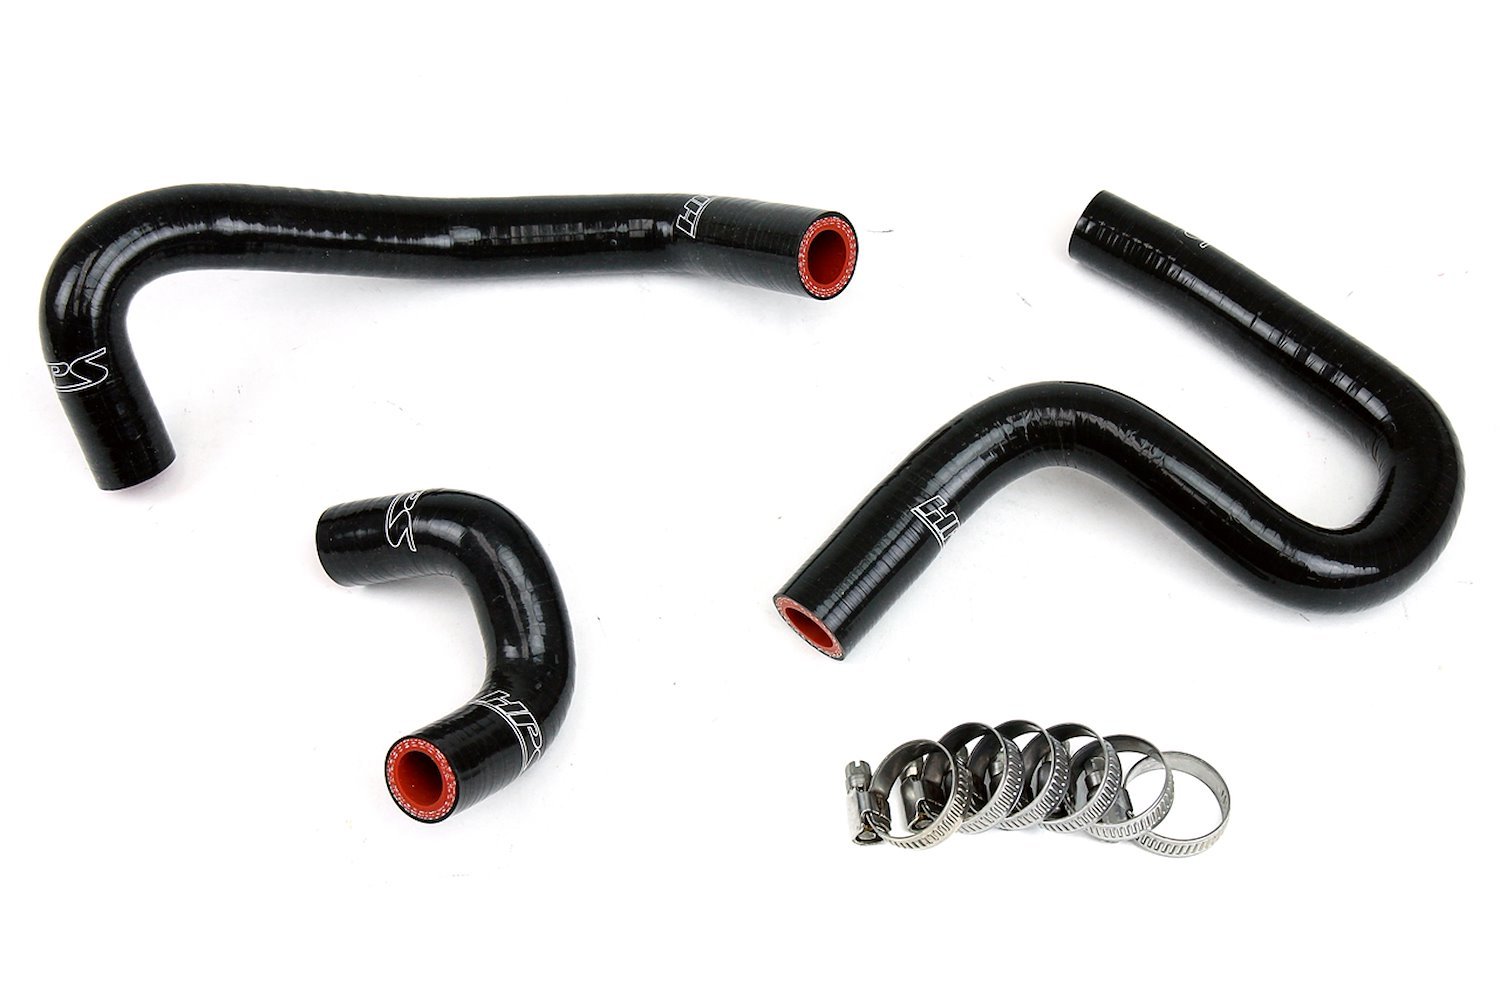 57-1797-BLK Heater Hose Kit, High-Temp 3-Ply Reinforced Silicone, Replace OEM Rubber Heater Coolant Hoses